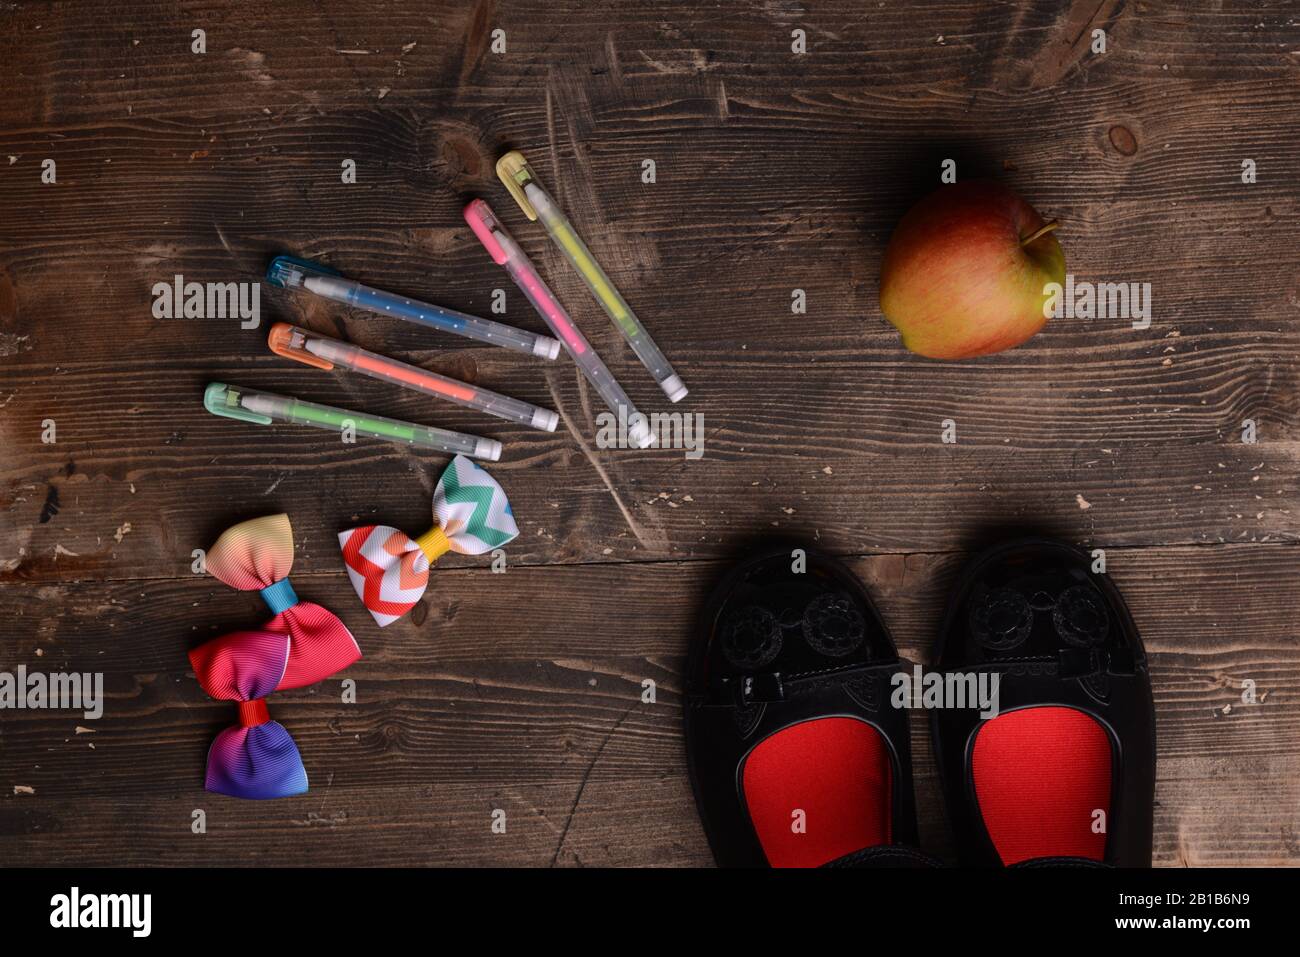 School related items in flat lay Stock Photo